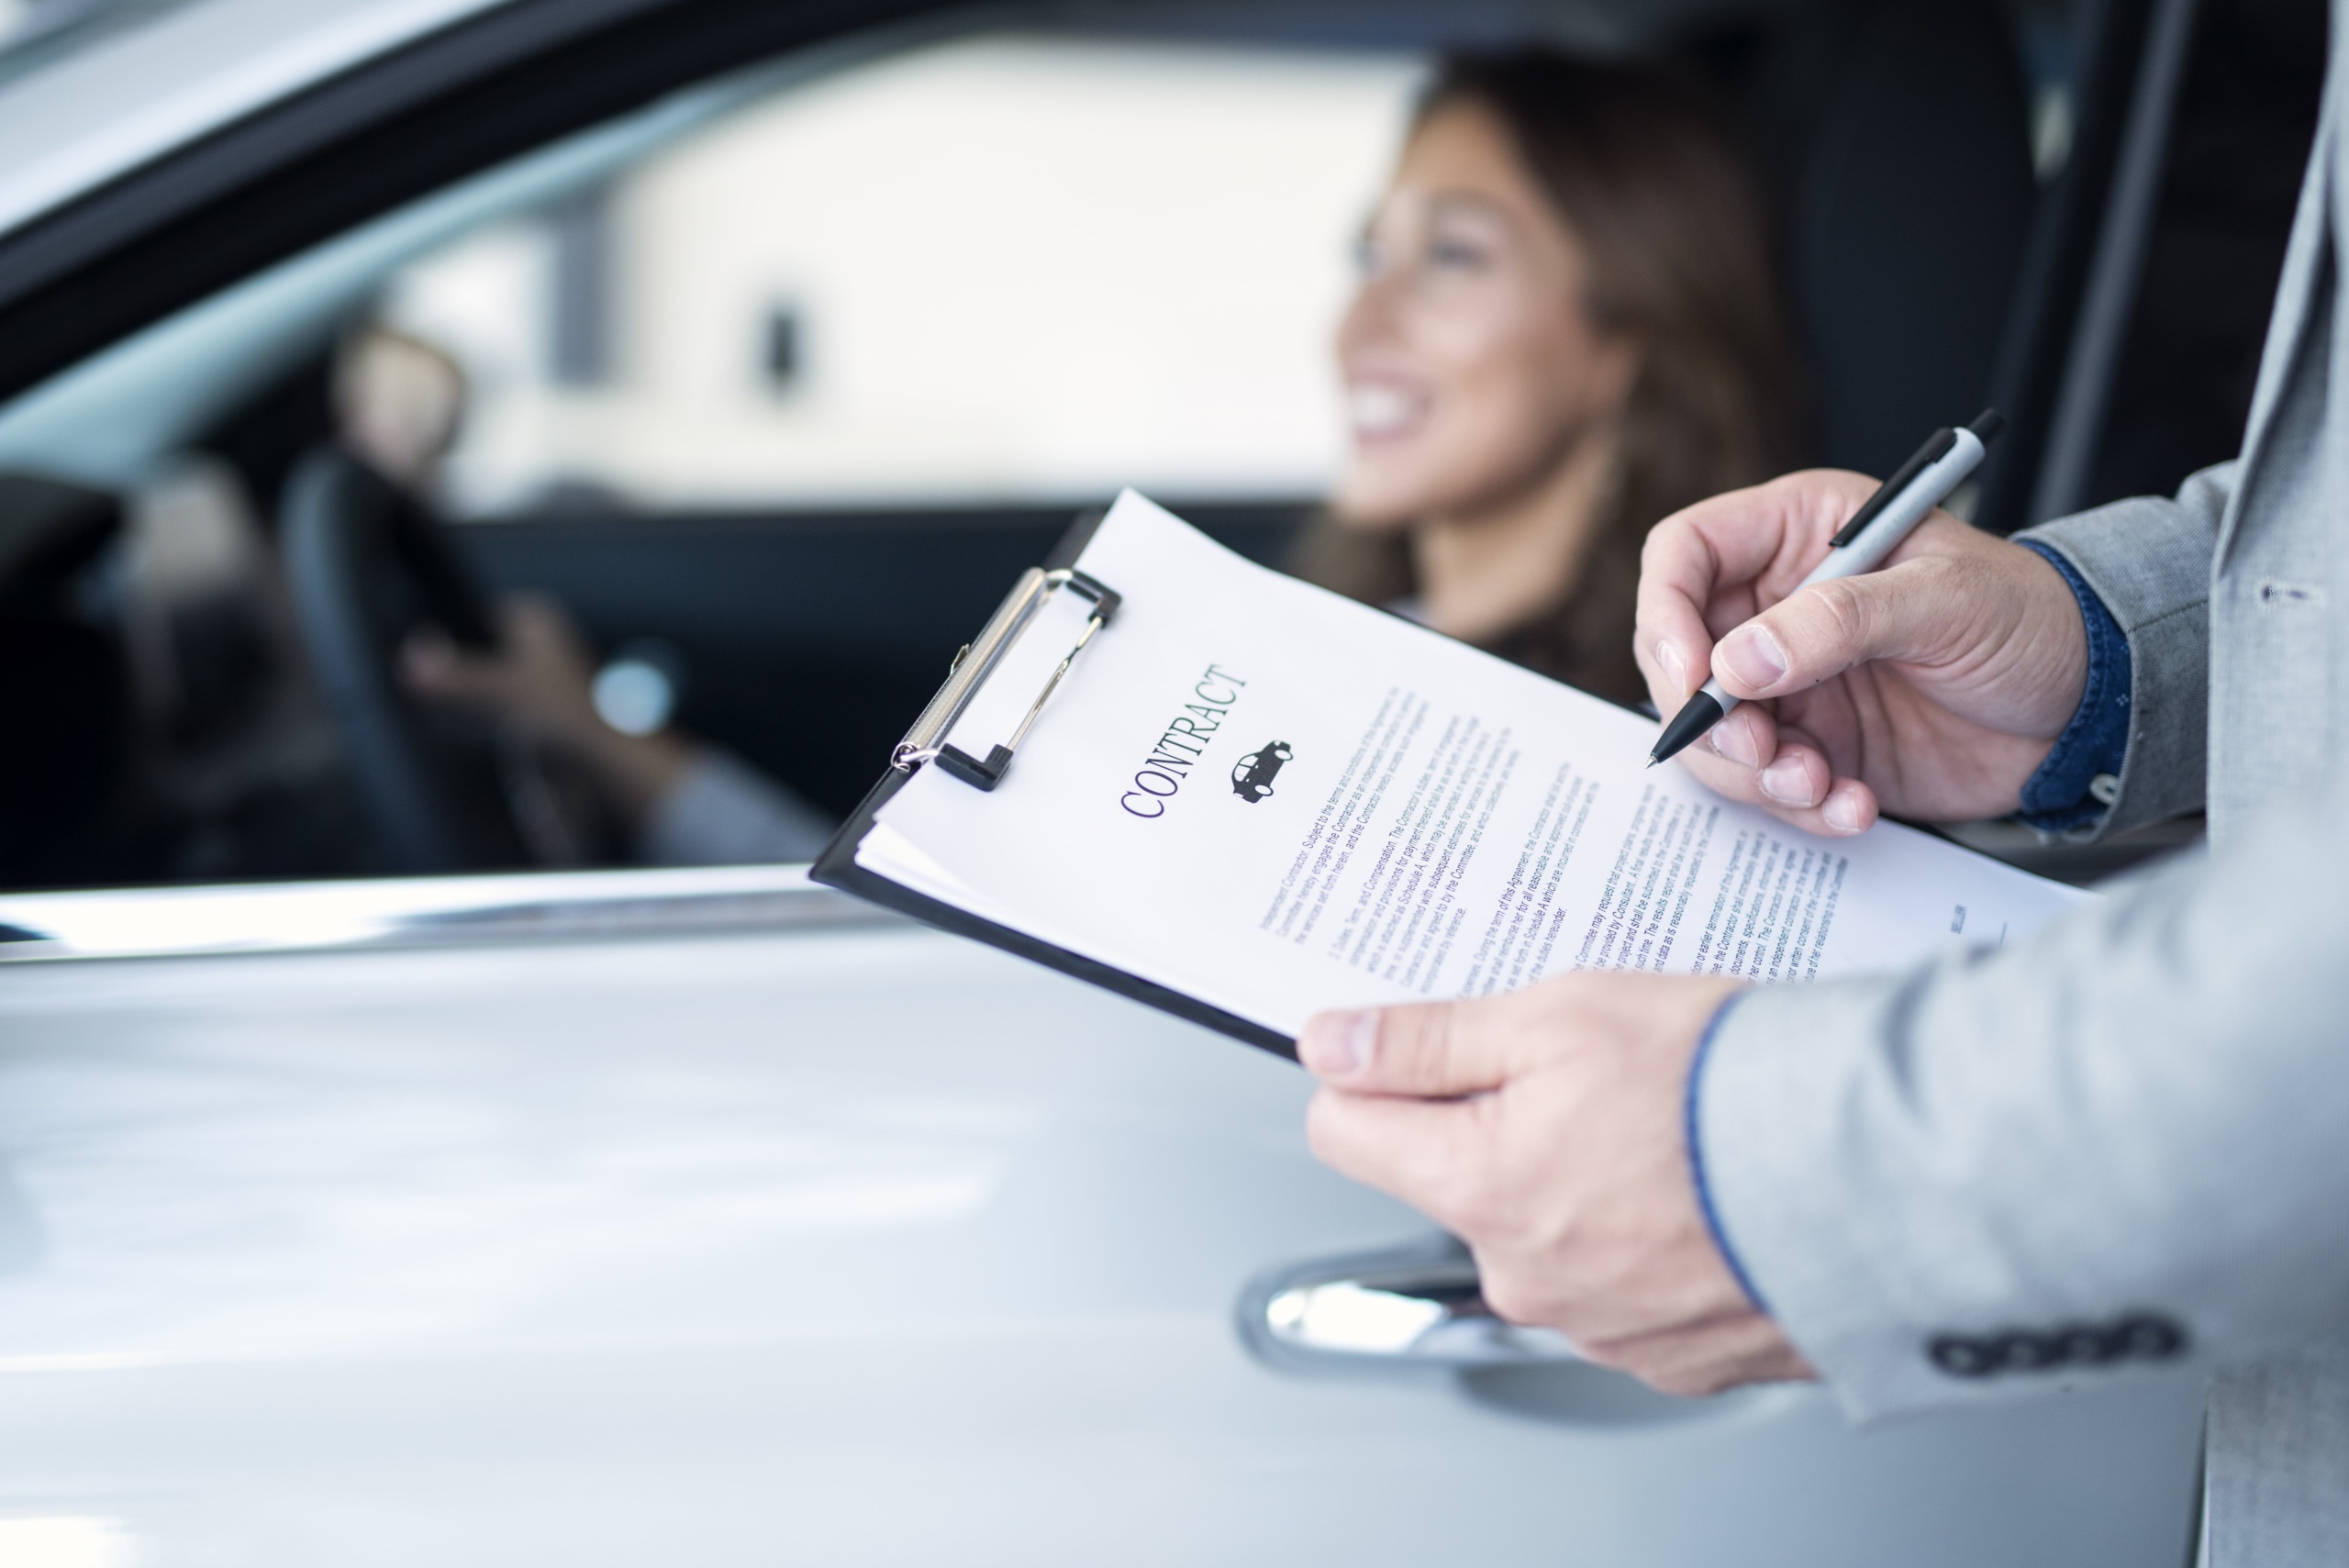 After you sell the car, do you have to notify the RCA insurer